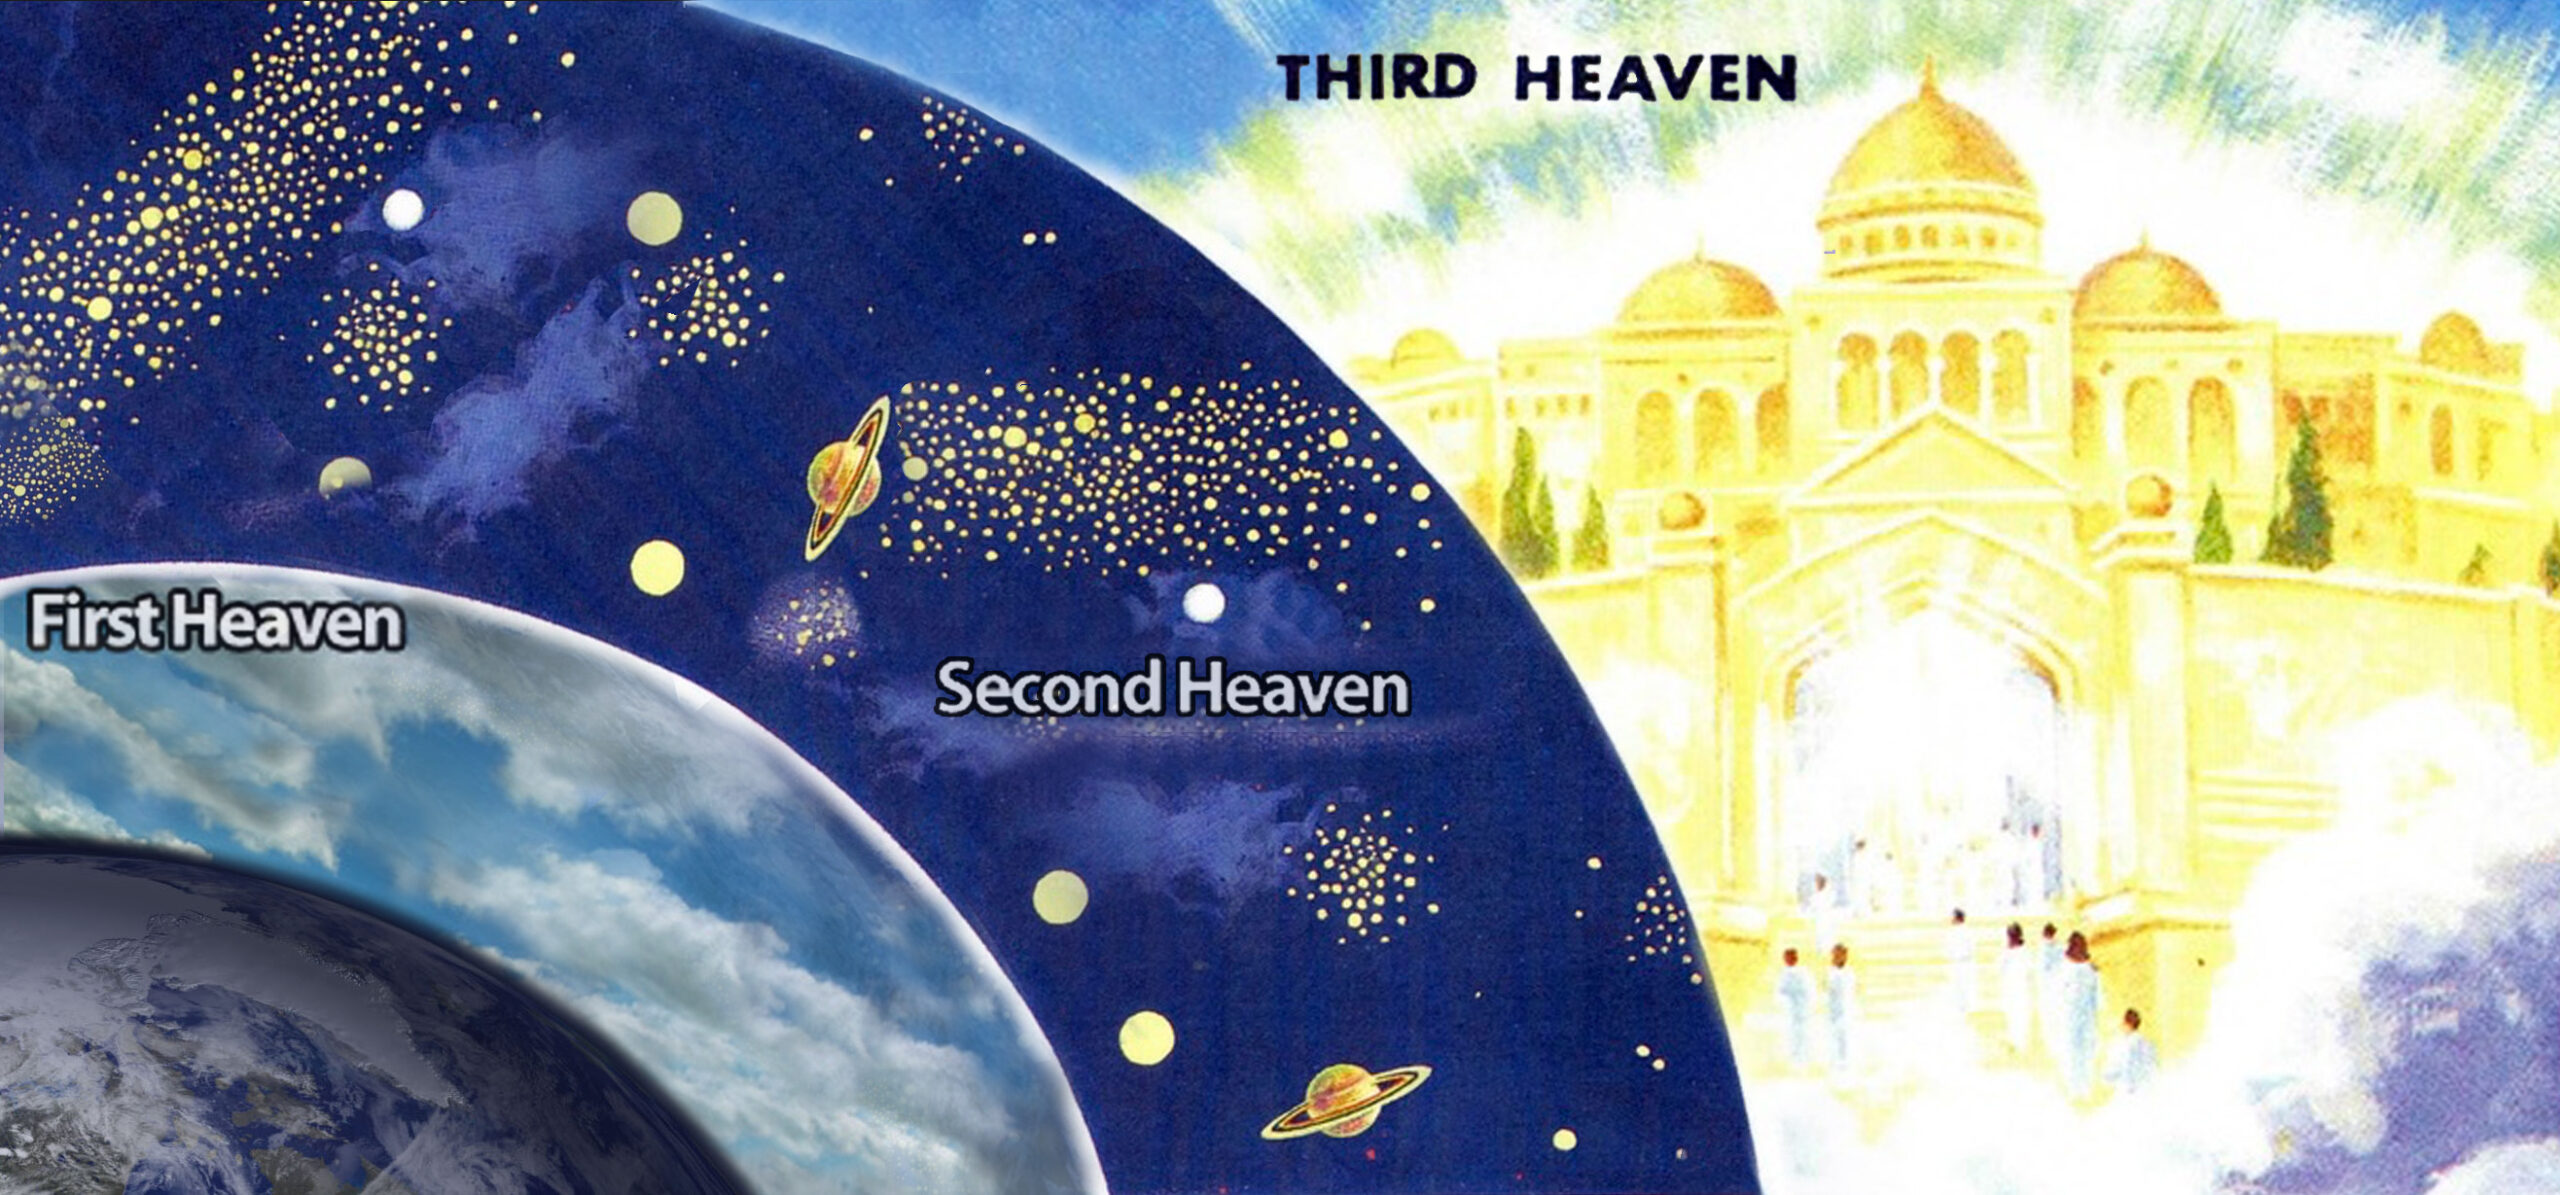 moving from the 1st heaven to the 3rd heaven